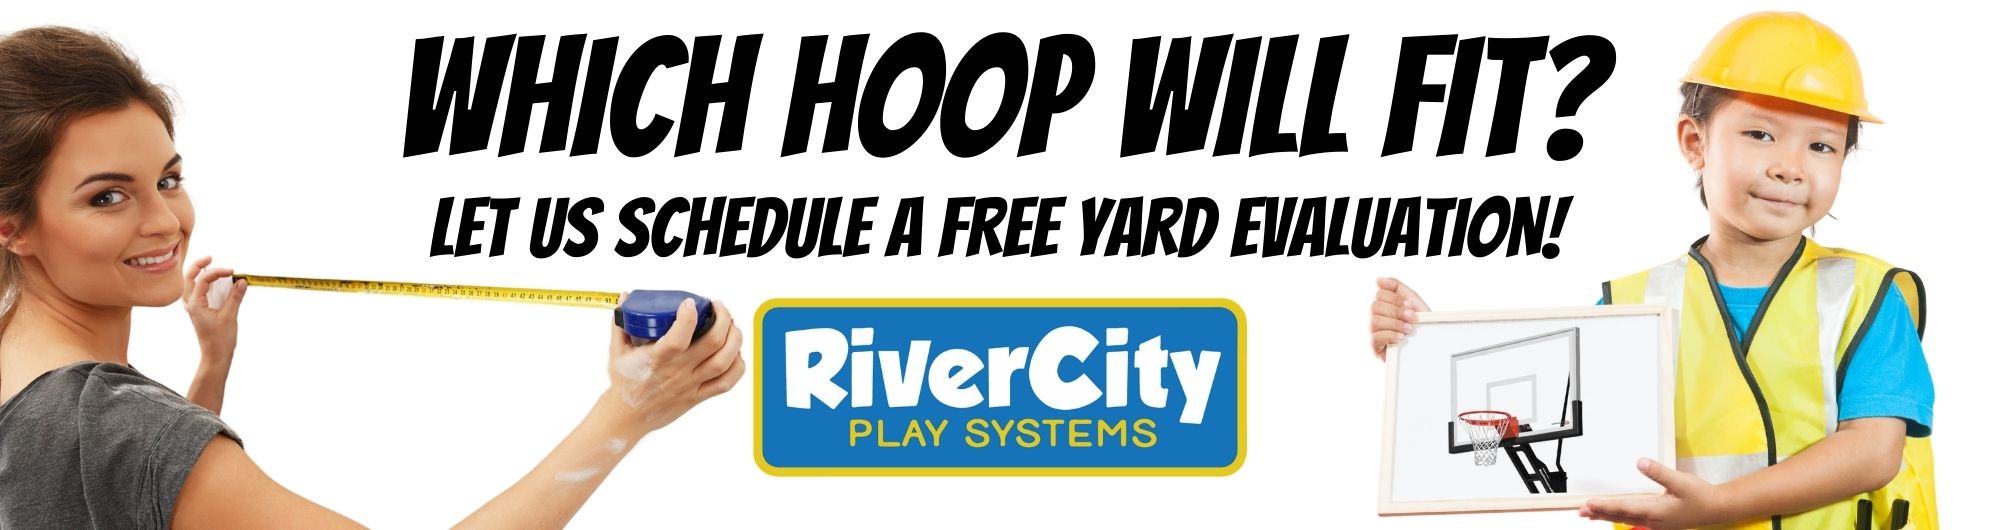 Free basketball hoop yard evaluation. Let us help you decide which basketball hoop will fit best in your space.